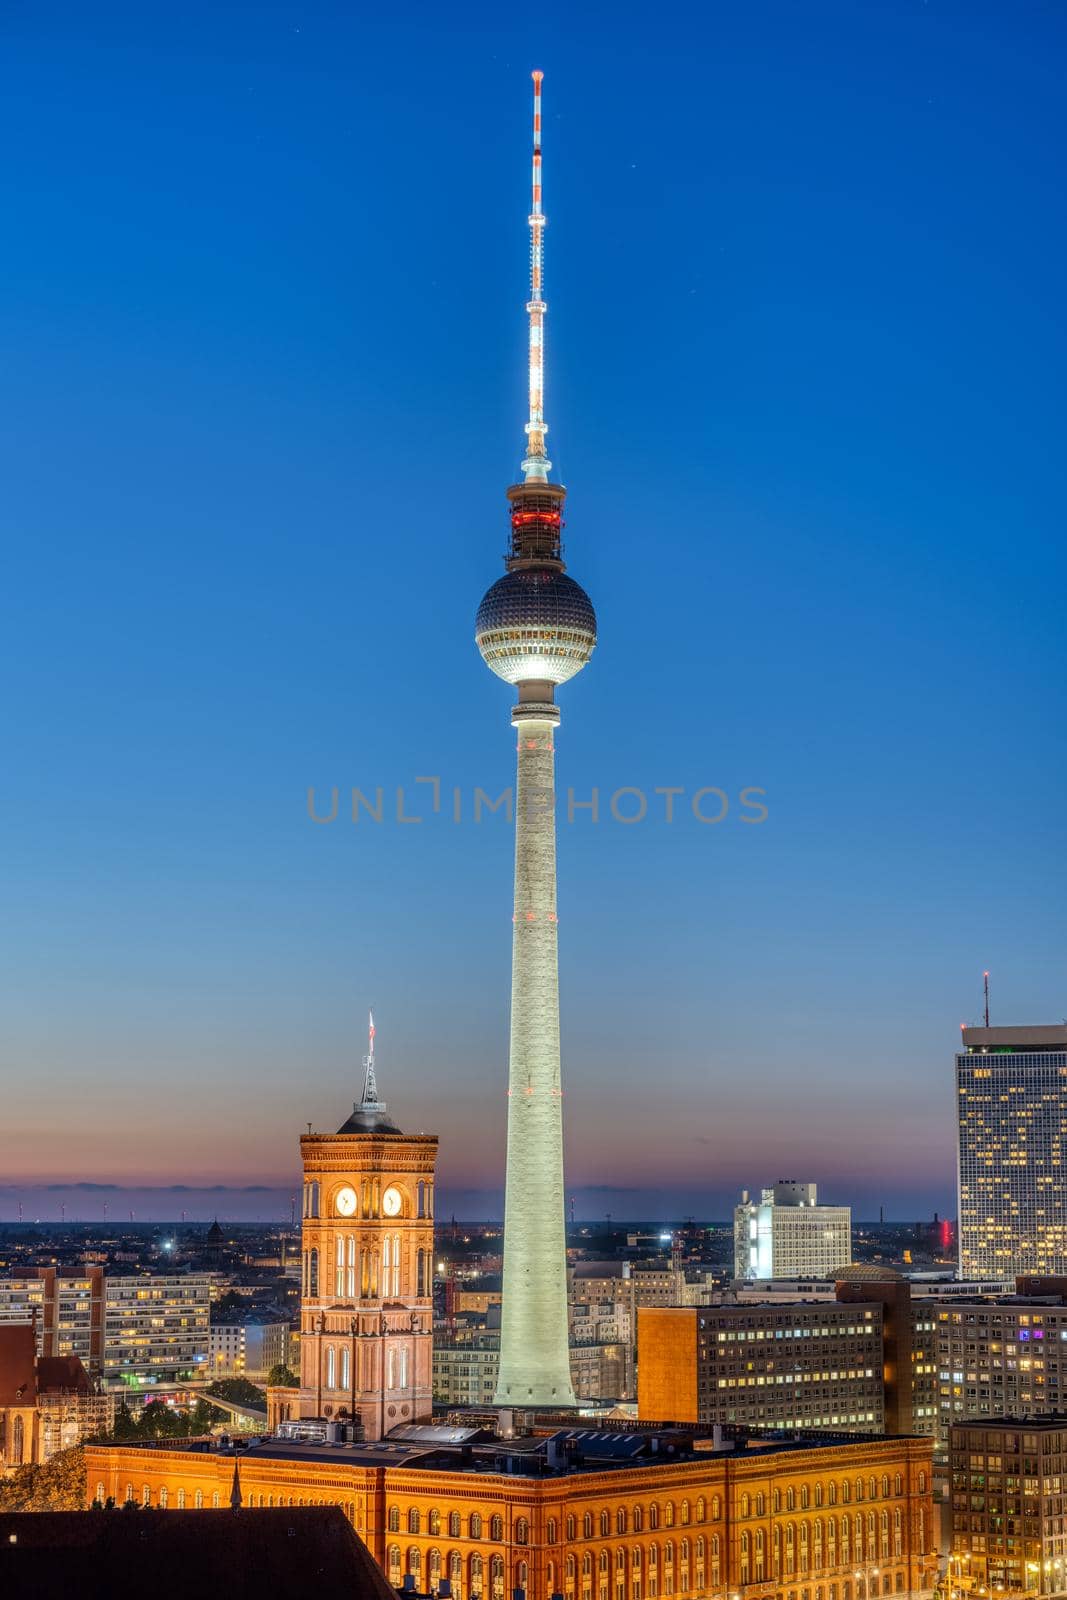 The iconic TV Tower of Berlin with the town hall at night